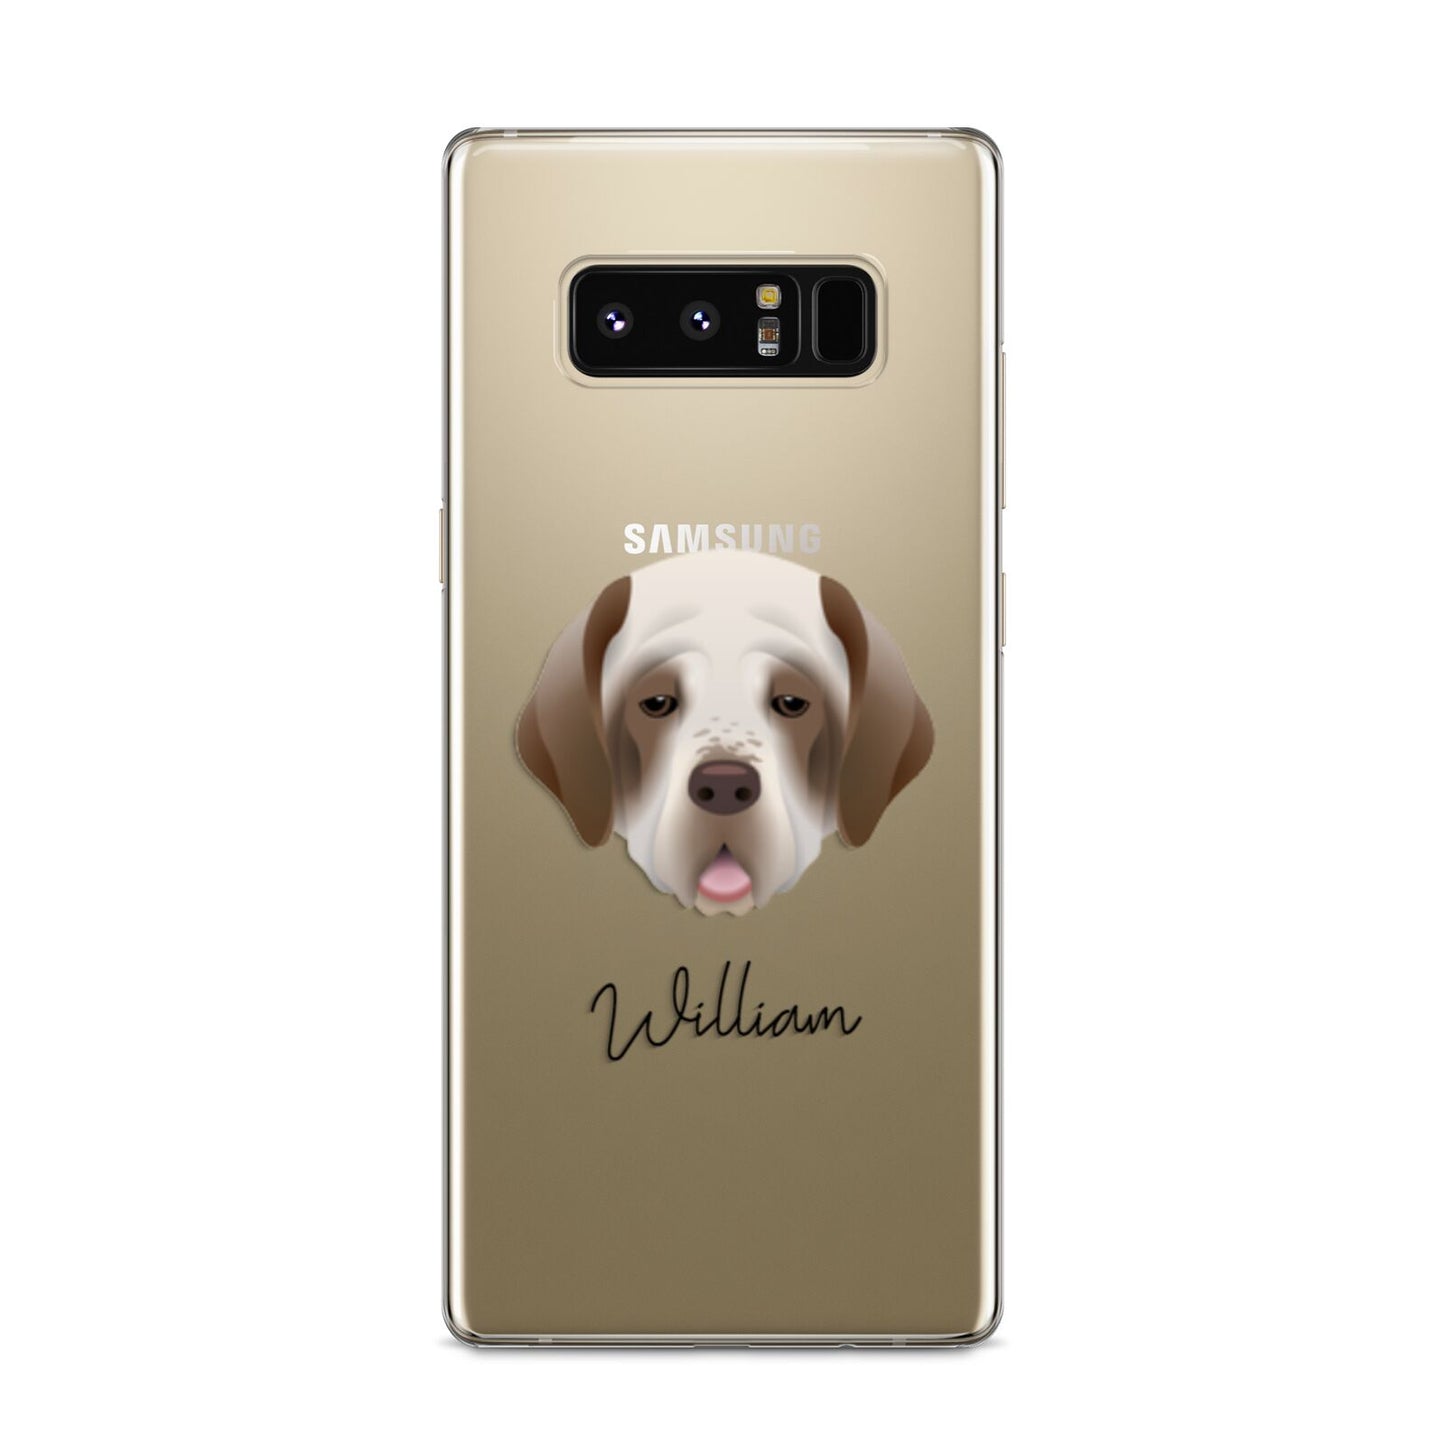 Clumber Spaniel Personalised Samsung Galaxy S8 Case